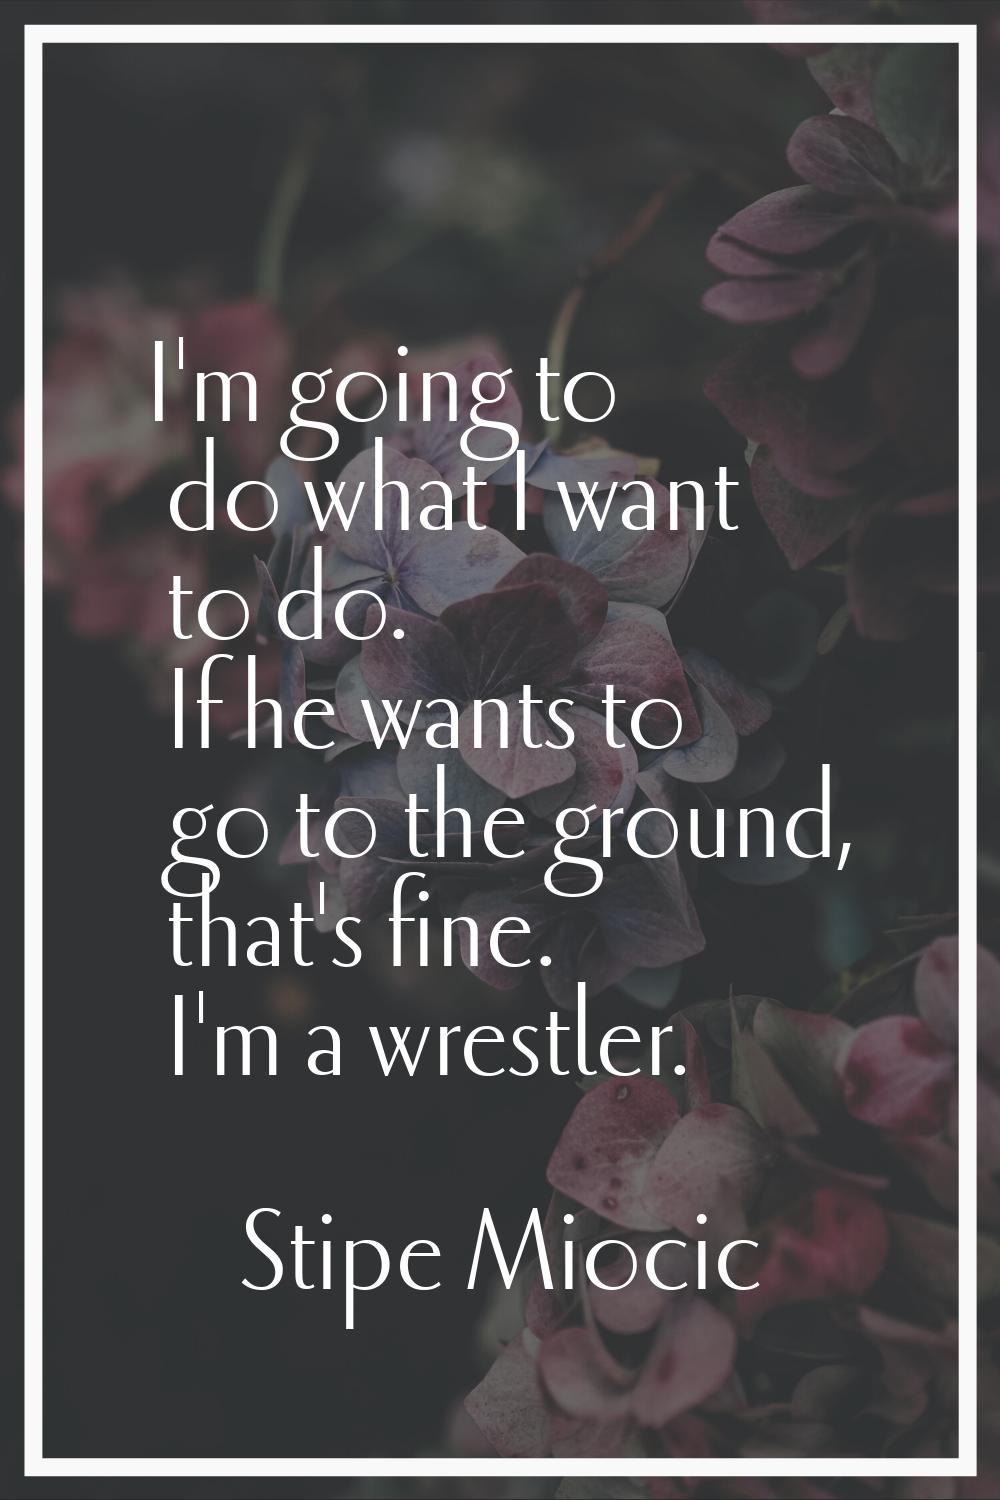 I'm going to do what I want to do. If he wants to go to the ground, that's fine. I'm a wrestler.